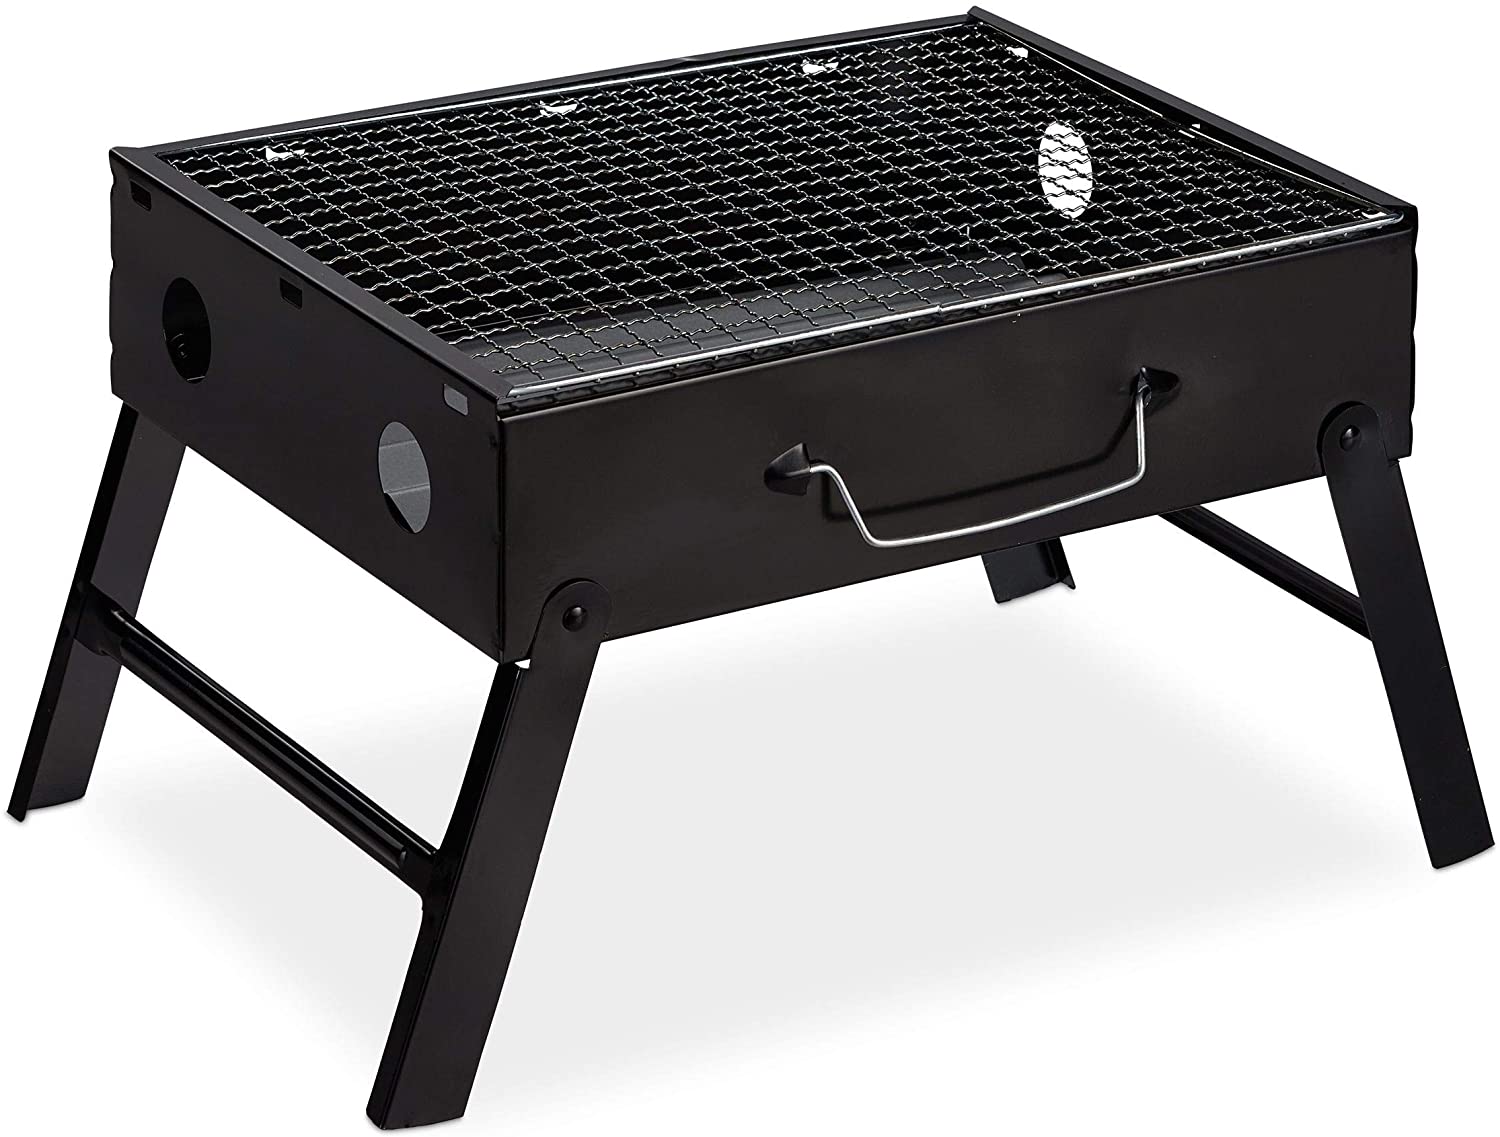 Relaxdays Folding Camping Barbecue Grill